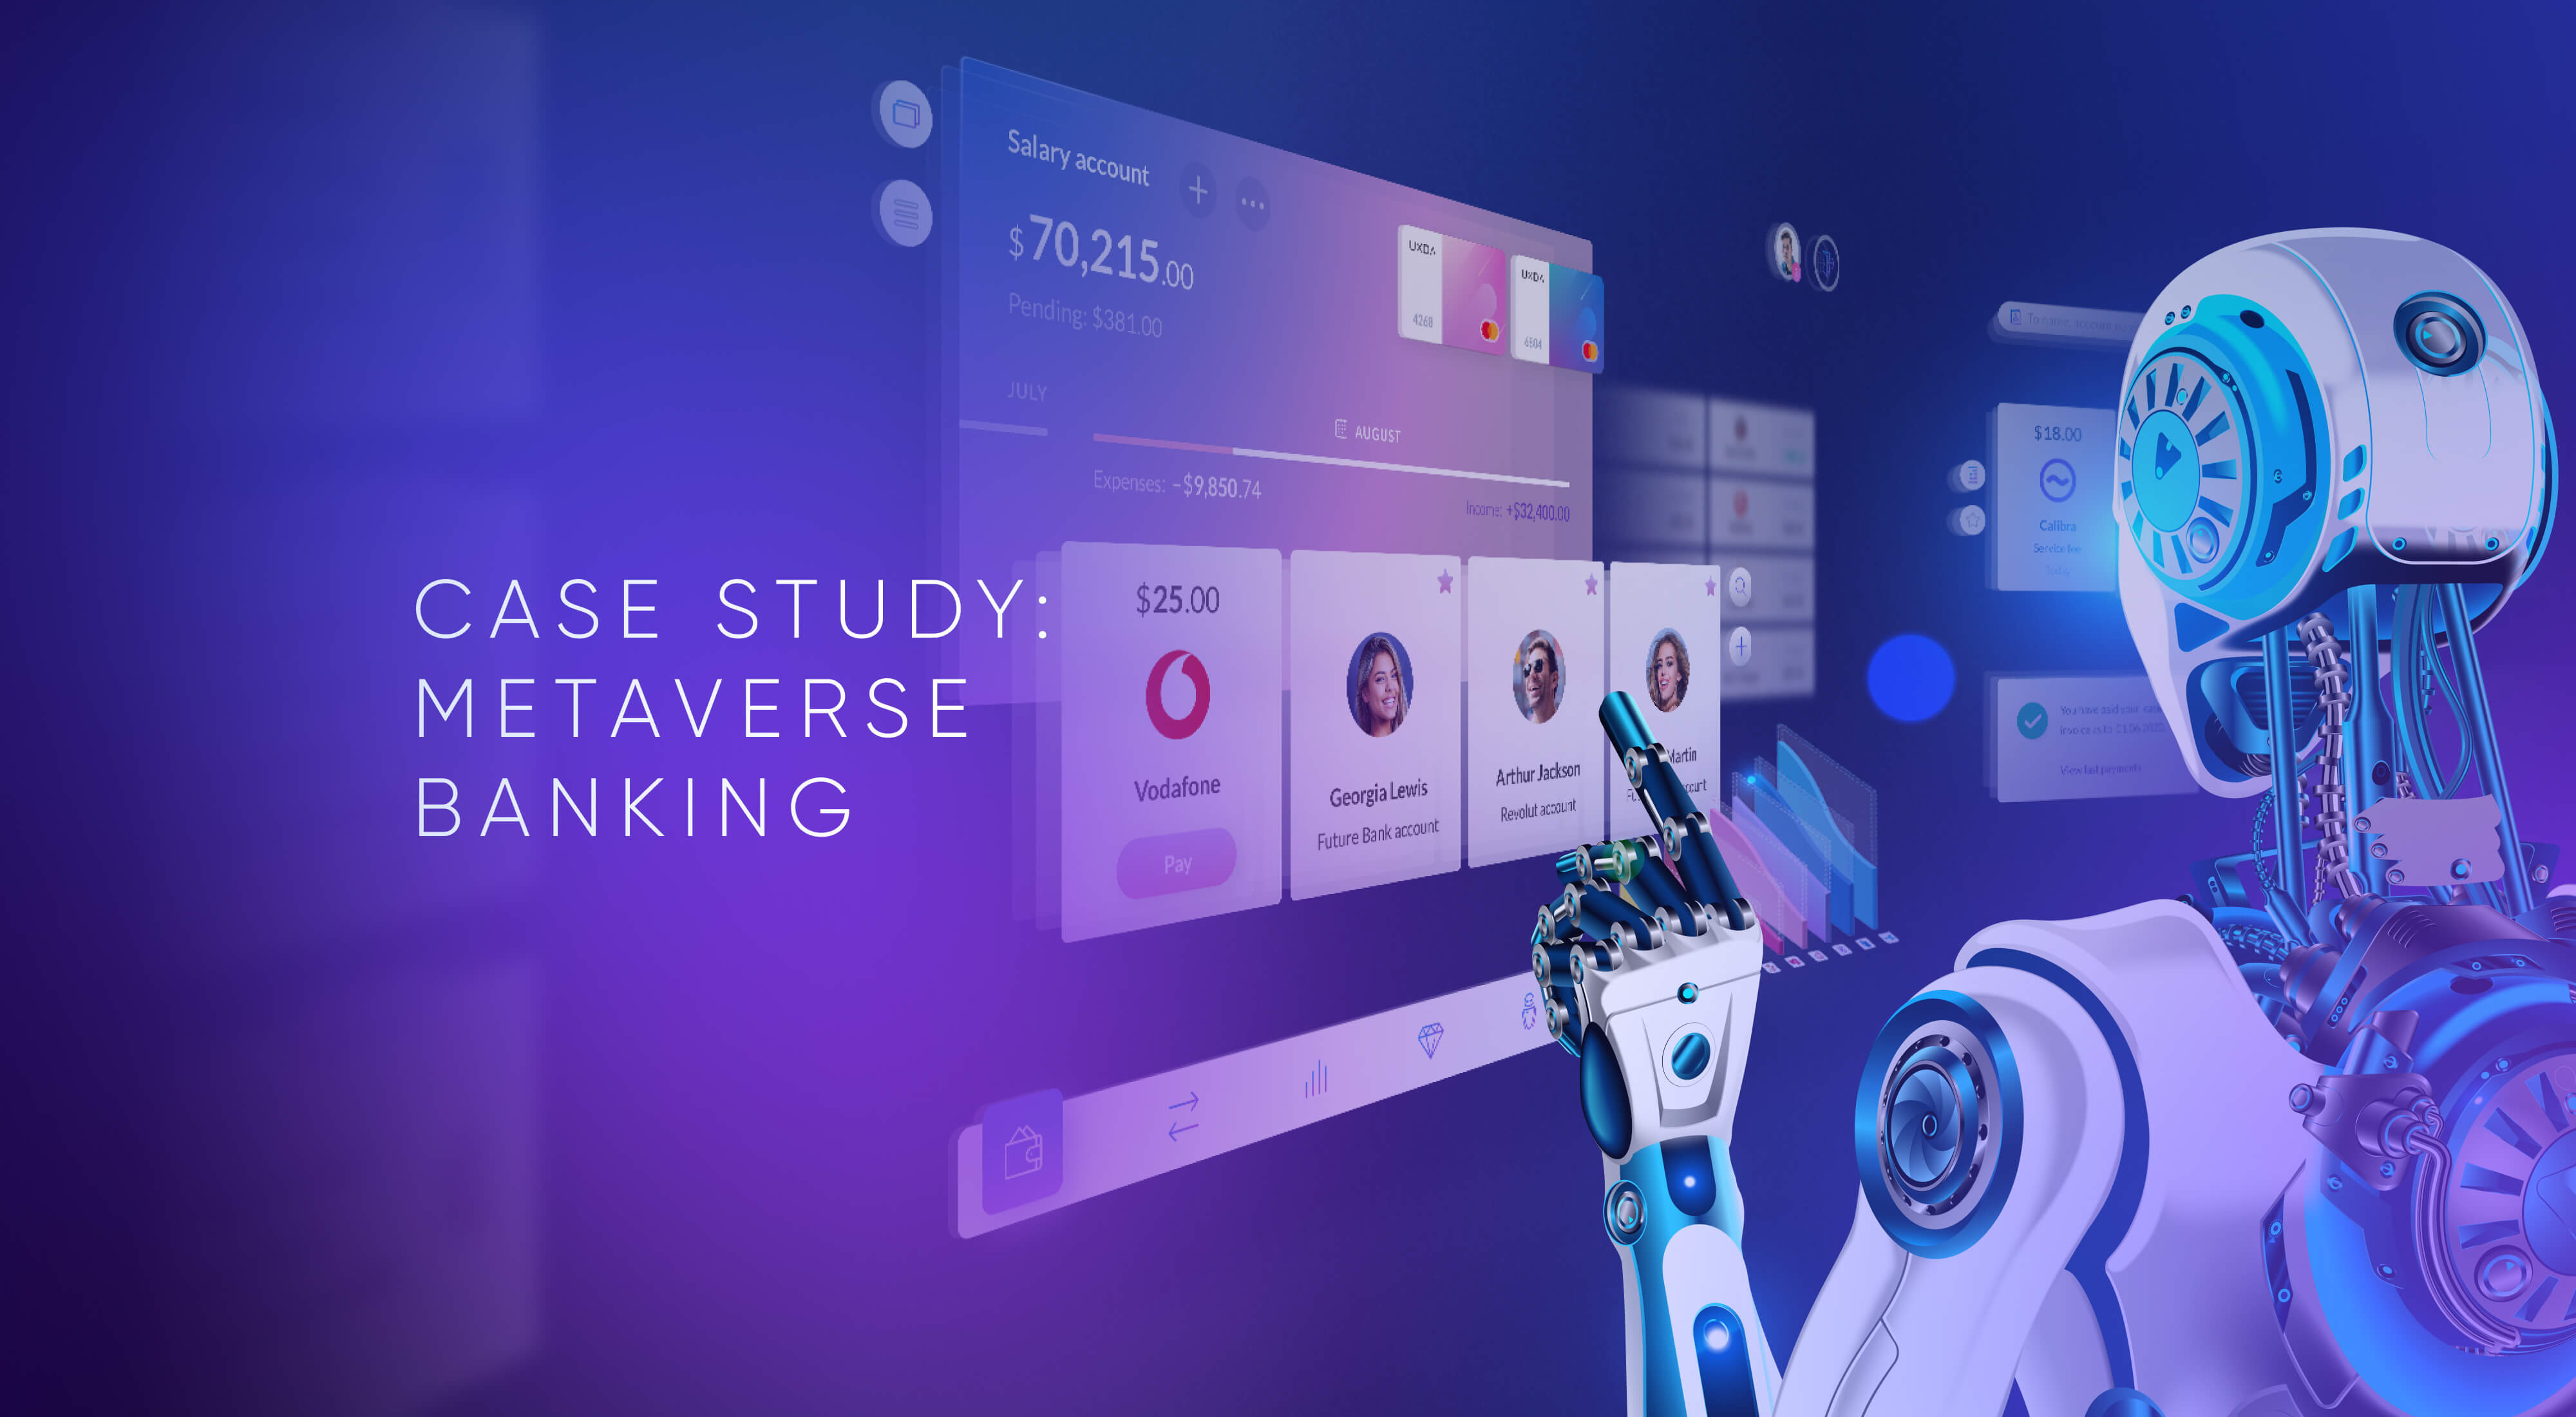 UX Case Study: Metaverse Banking VR / AR Design Concept of the Future